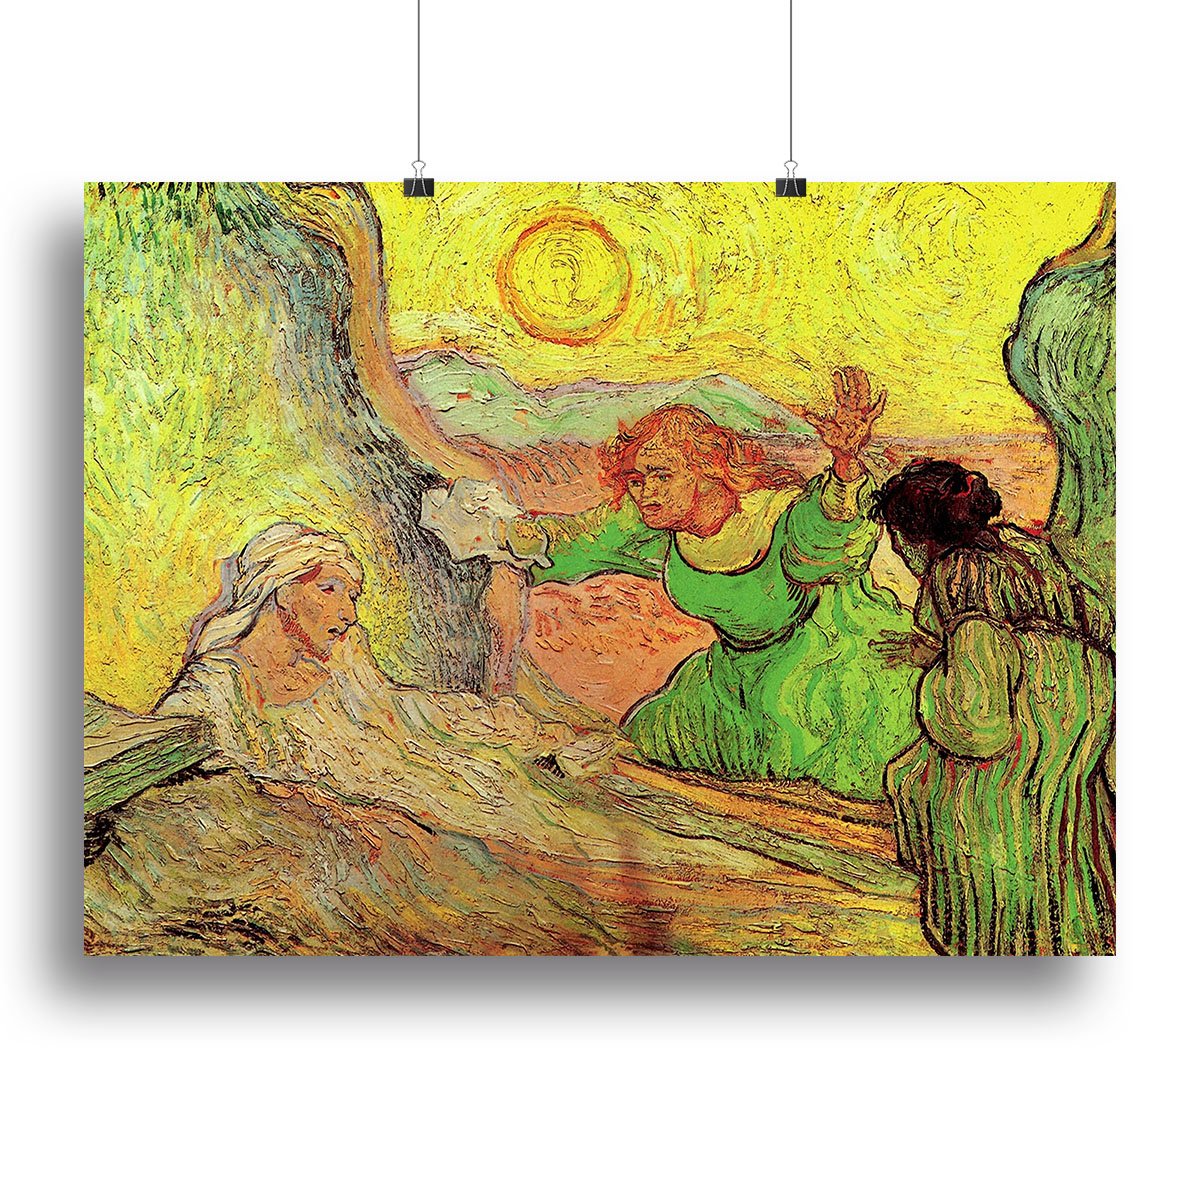 The Raising of Lazarus after Rembrandt by Van Gogh Canvas Print or Poster